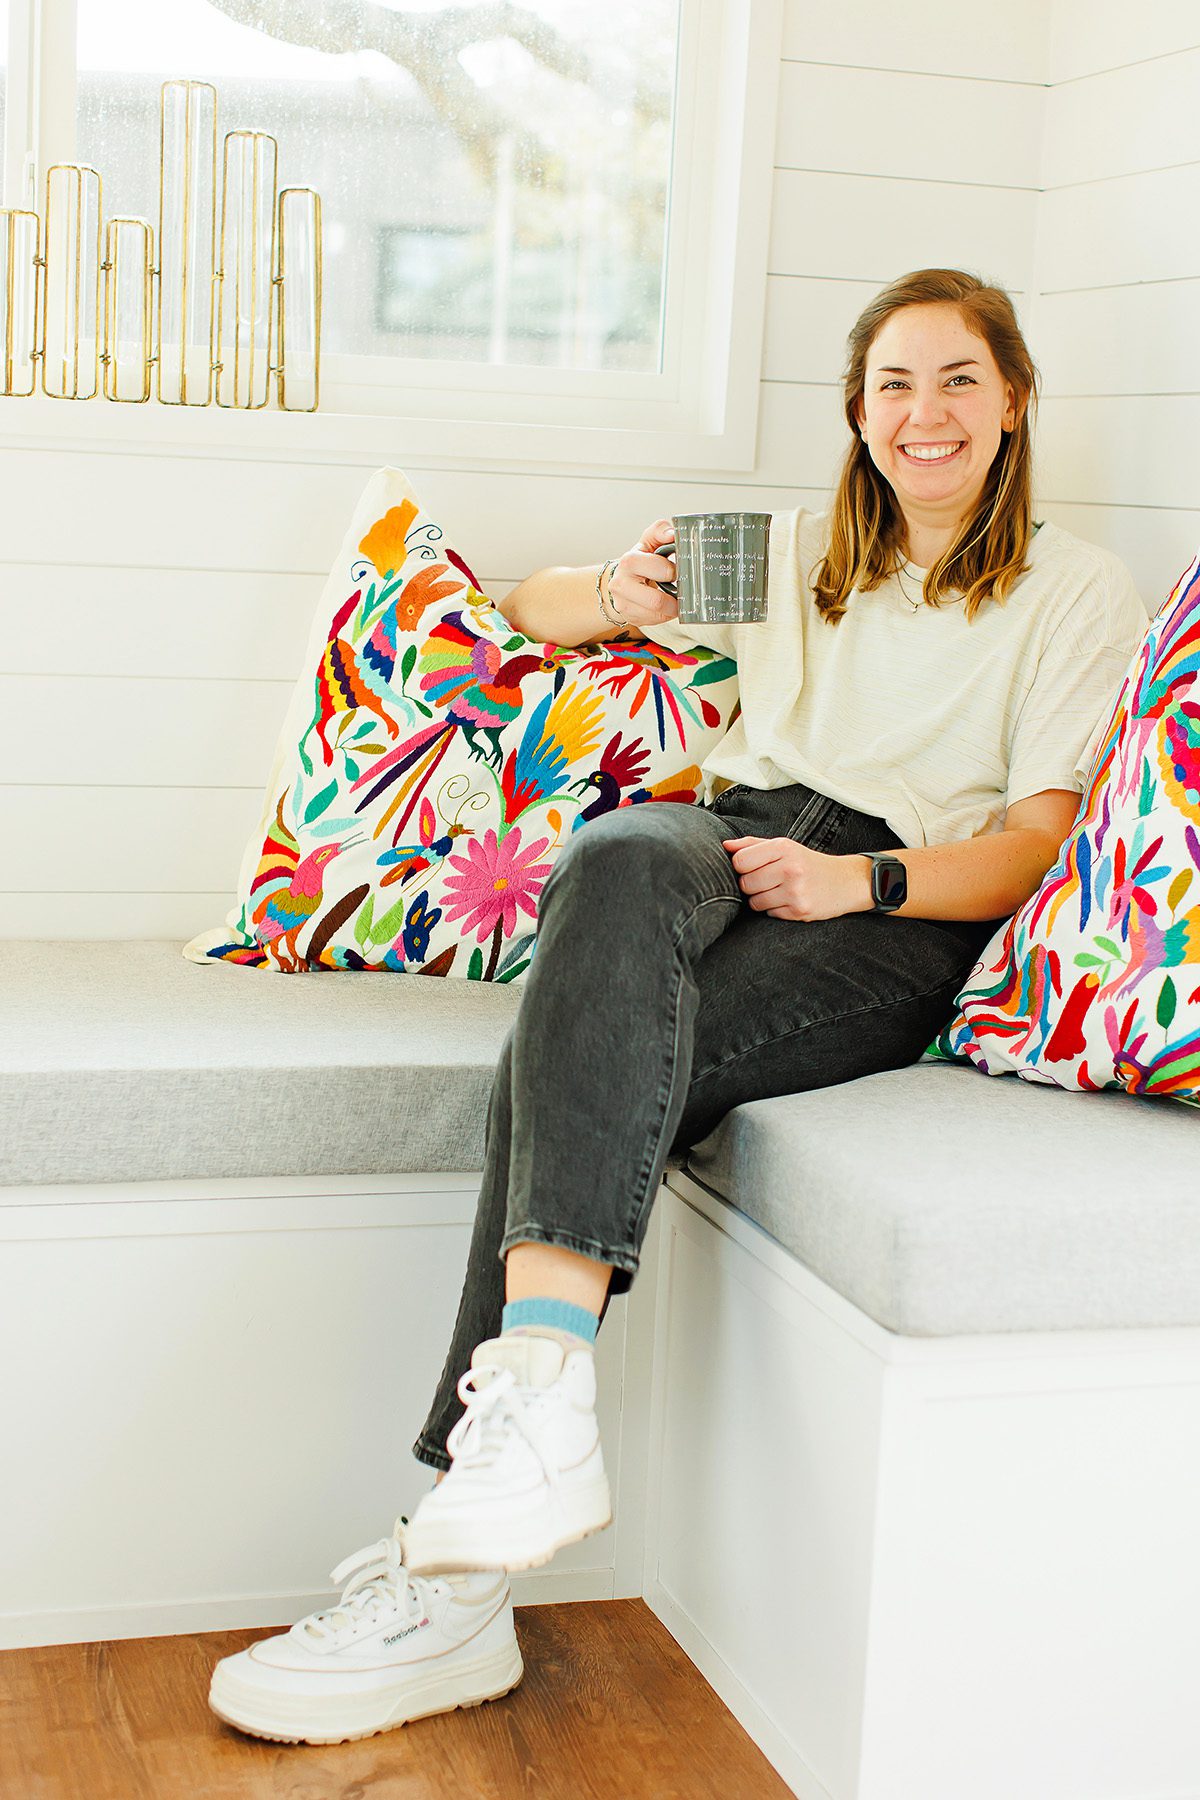 Emily Weyand, Dripping Springs High School math teacher, drinking coffee in her tiny house